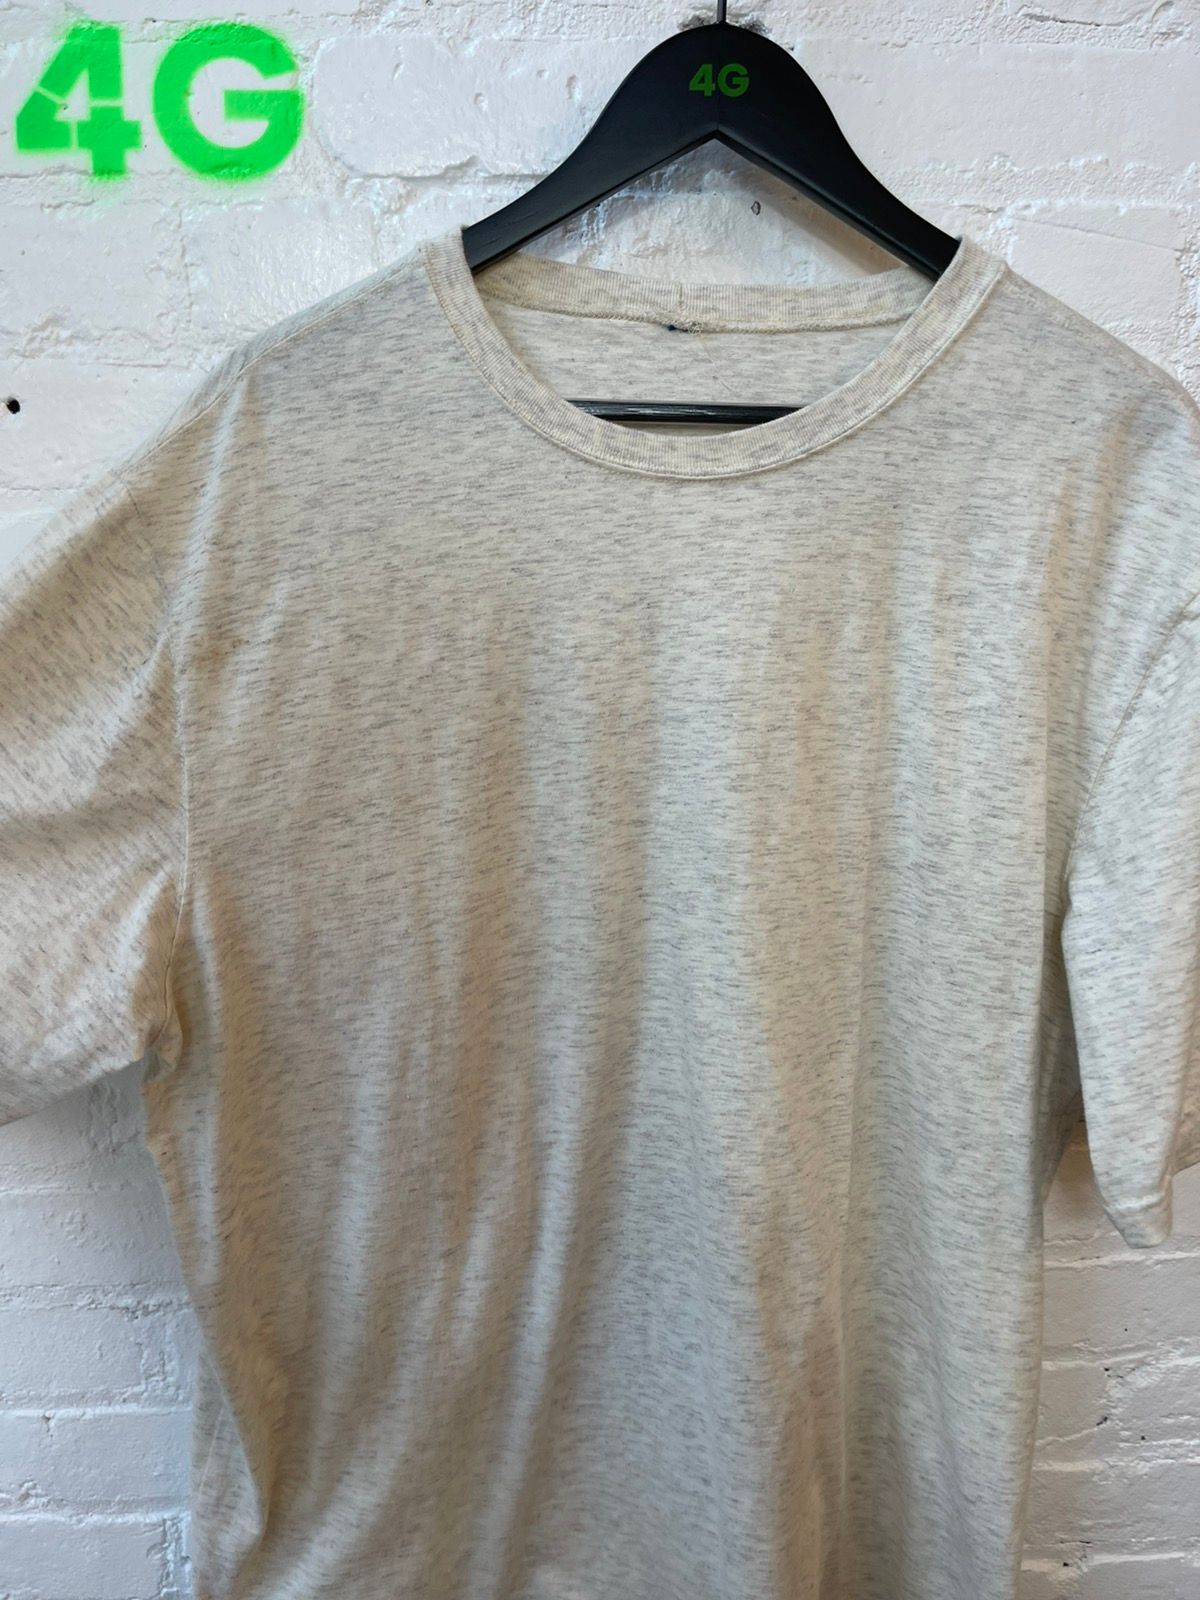 Vintage 90s Perfect Boxy Fit Grey T Shirt